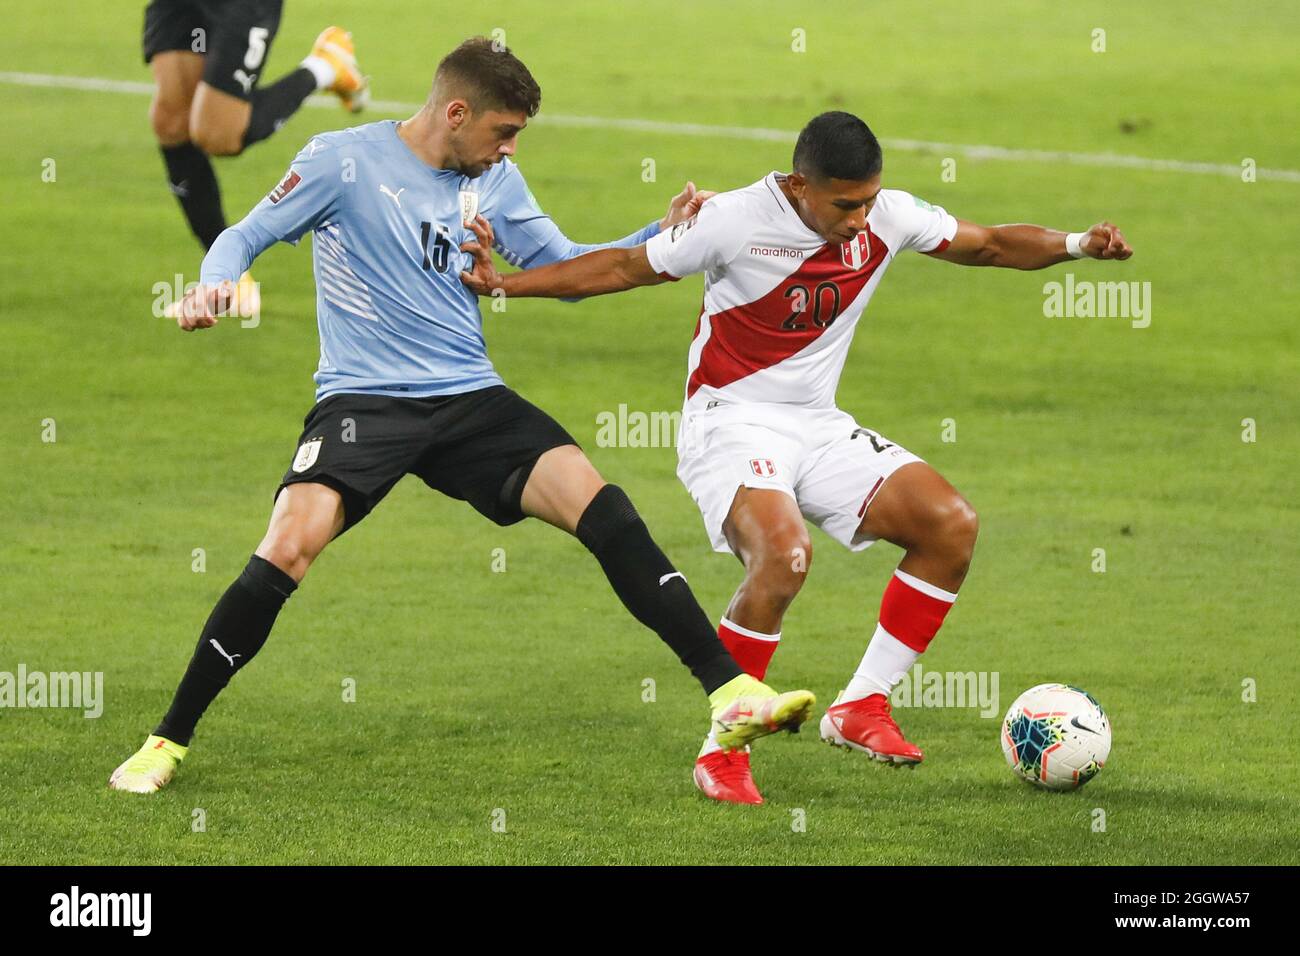 Lima, Peru. 02nd Sep, 2021. Federico Valverde and Edison Flores during the 2022 Football World Cup Qualifier between Peru adn Uruguay at the Estádio Nacional del Peru in Lima, Peru. The game ended 1-1 with Tapia scoring for the hosts in the 24th minute and de Arrascaeta equalizing for Uruguay in the 29th. Credit: SPP Sport Press Photo. /Alamy Live News Stock Photo